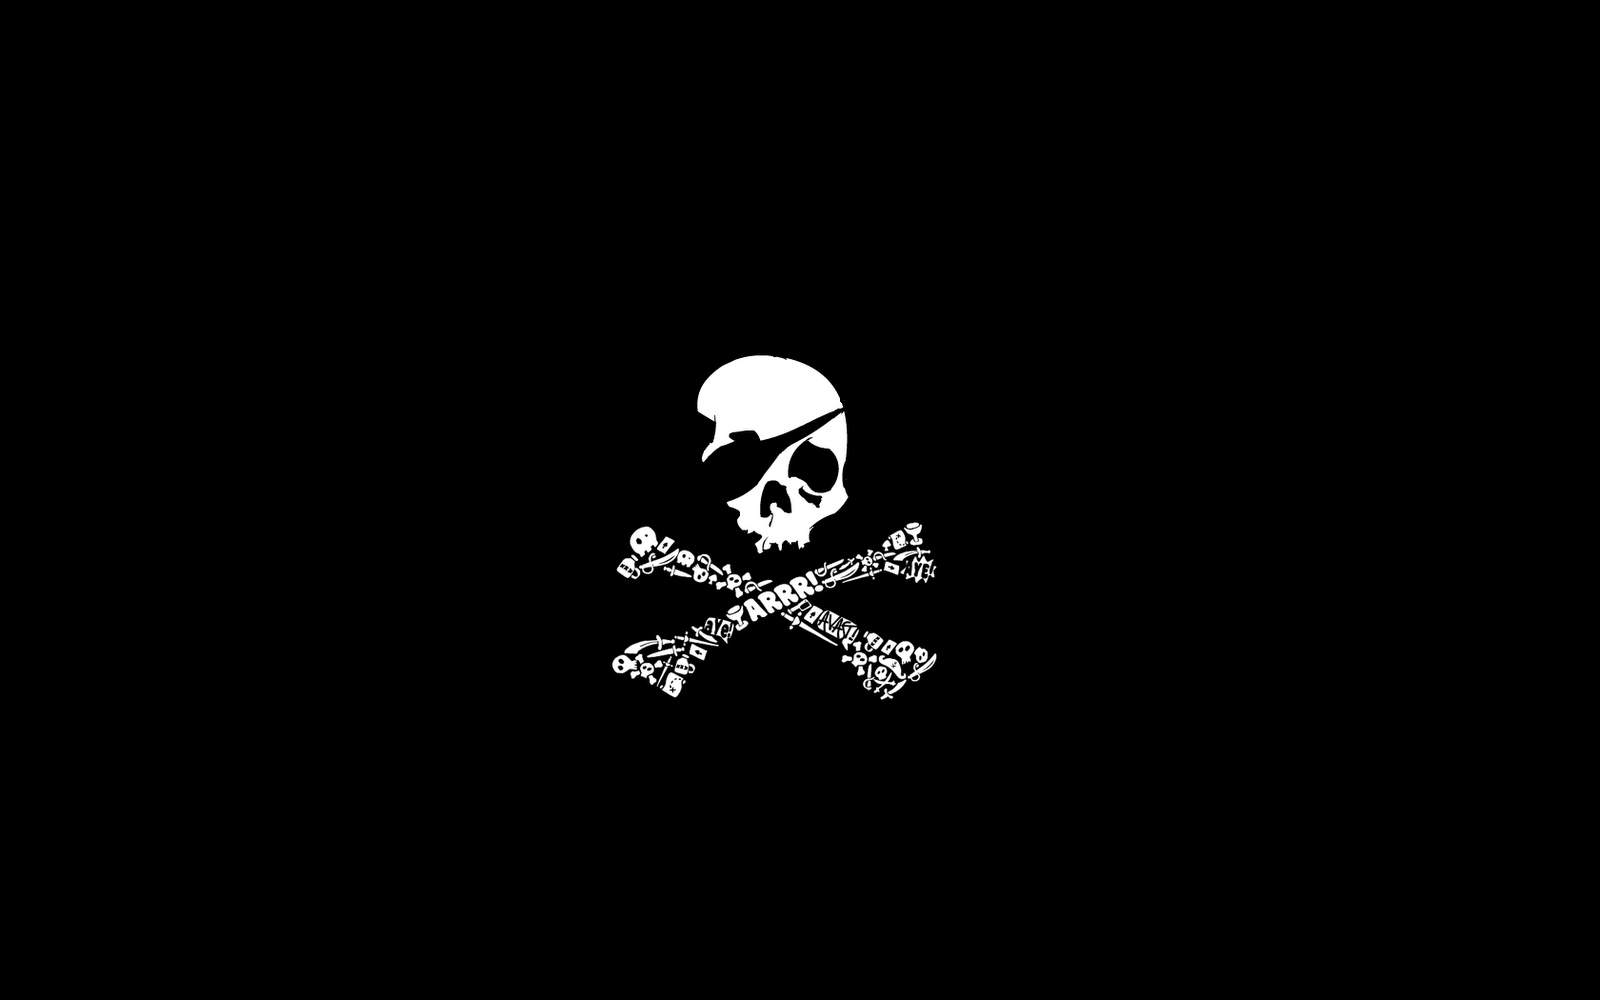 This Pirate Skull wallpaper is suitable for use on your Desktop